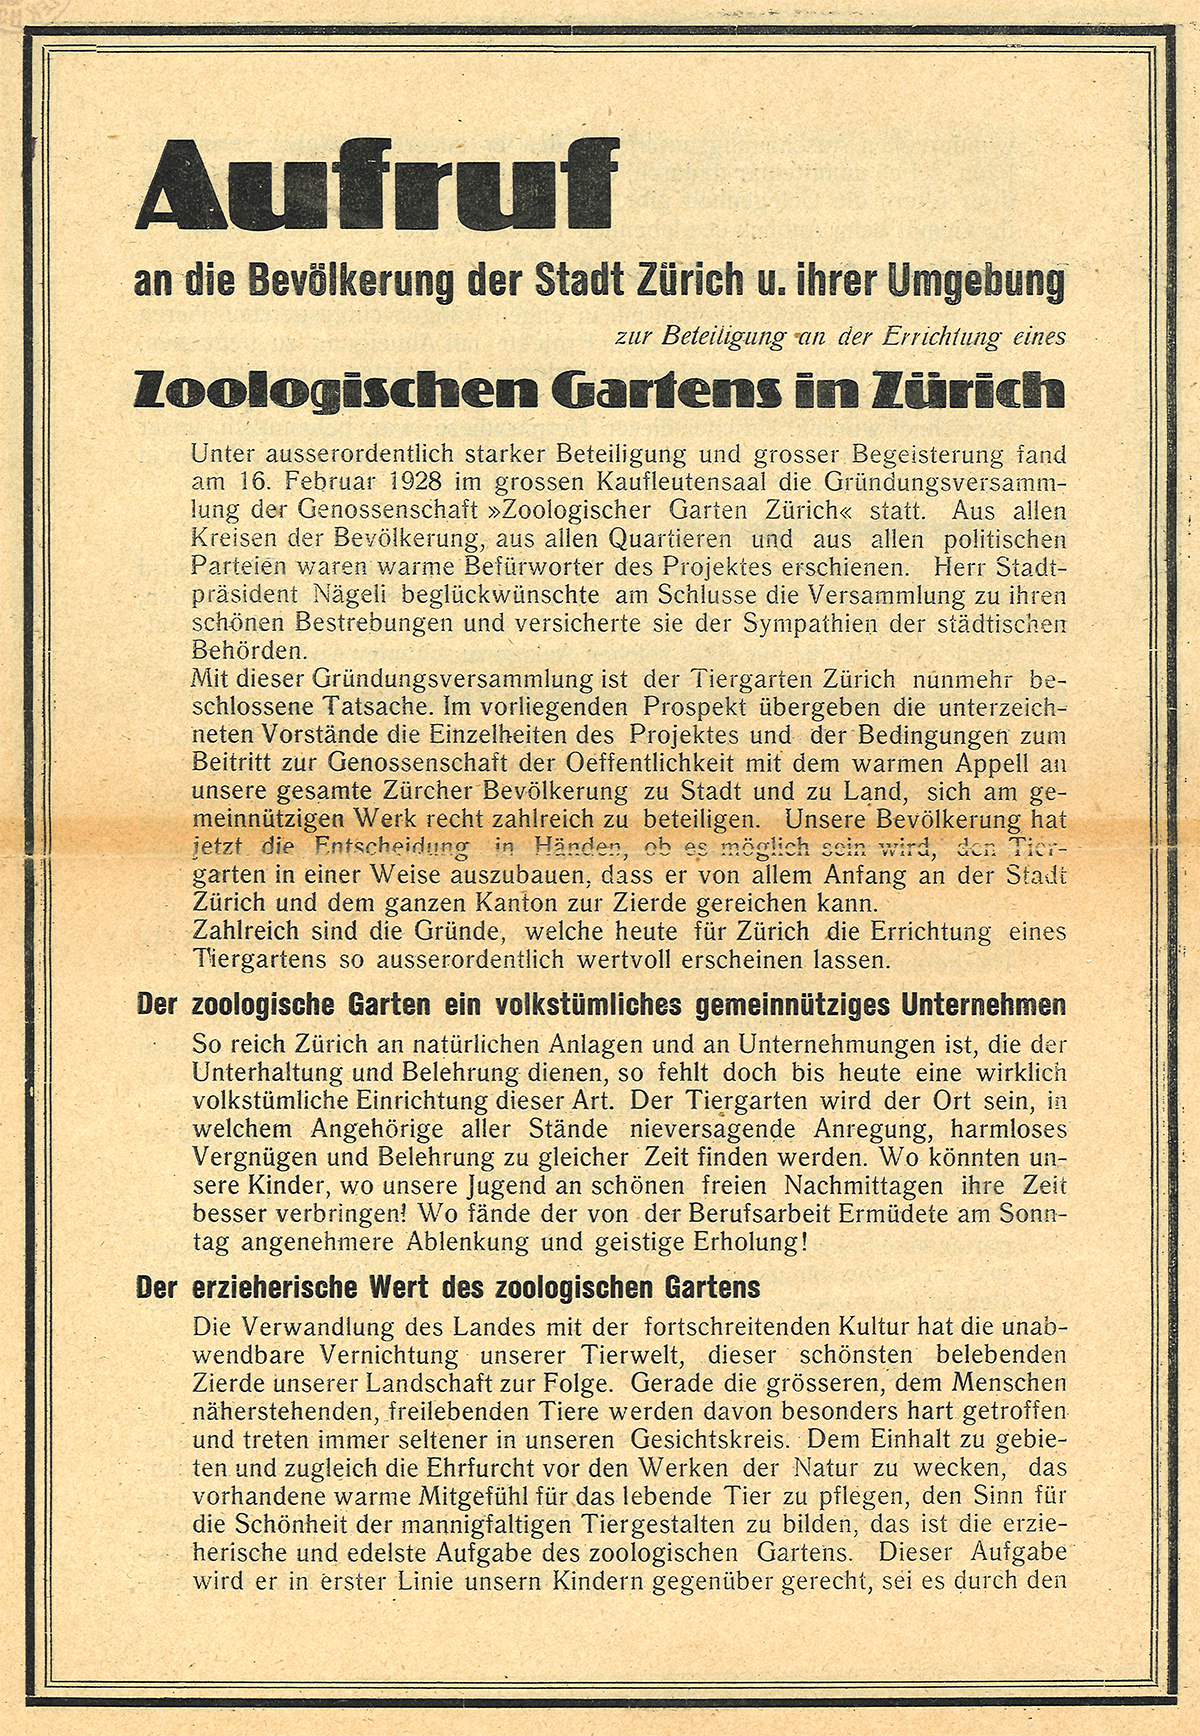 The Zurich Zoological Garden Cooperative sets out to raise funds to help build the zoo. In this flyer from 1928, it and the Zurich Zoo Society invite investors to purchase shares. (image: ZB Zürich)